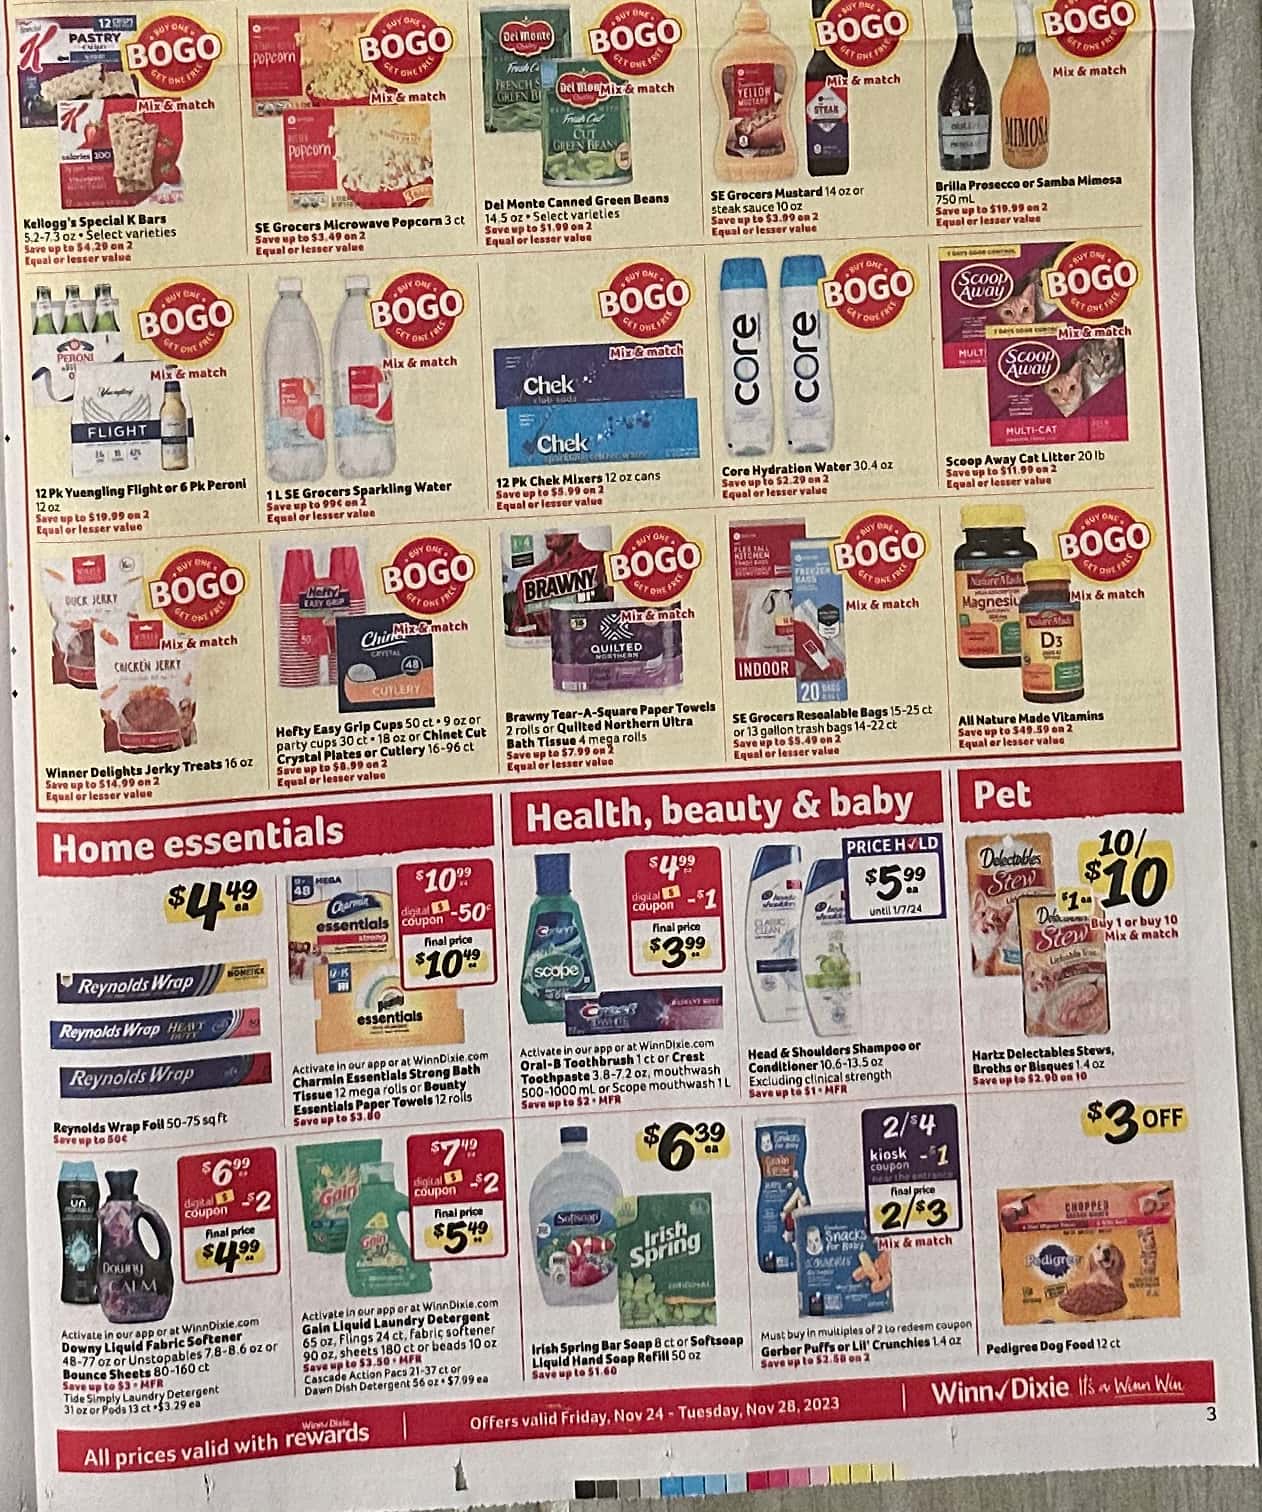 Winn Dixie Black Friday July 2024 Weekly Sales, Deals, Discounts and Digital Coupons.